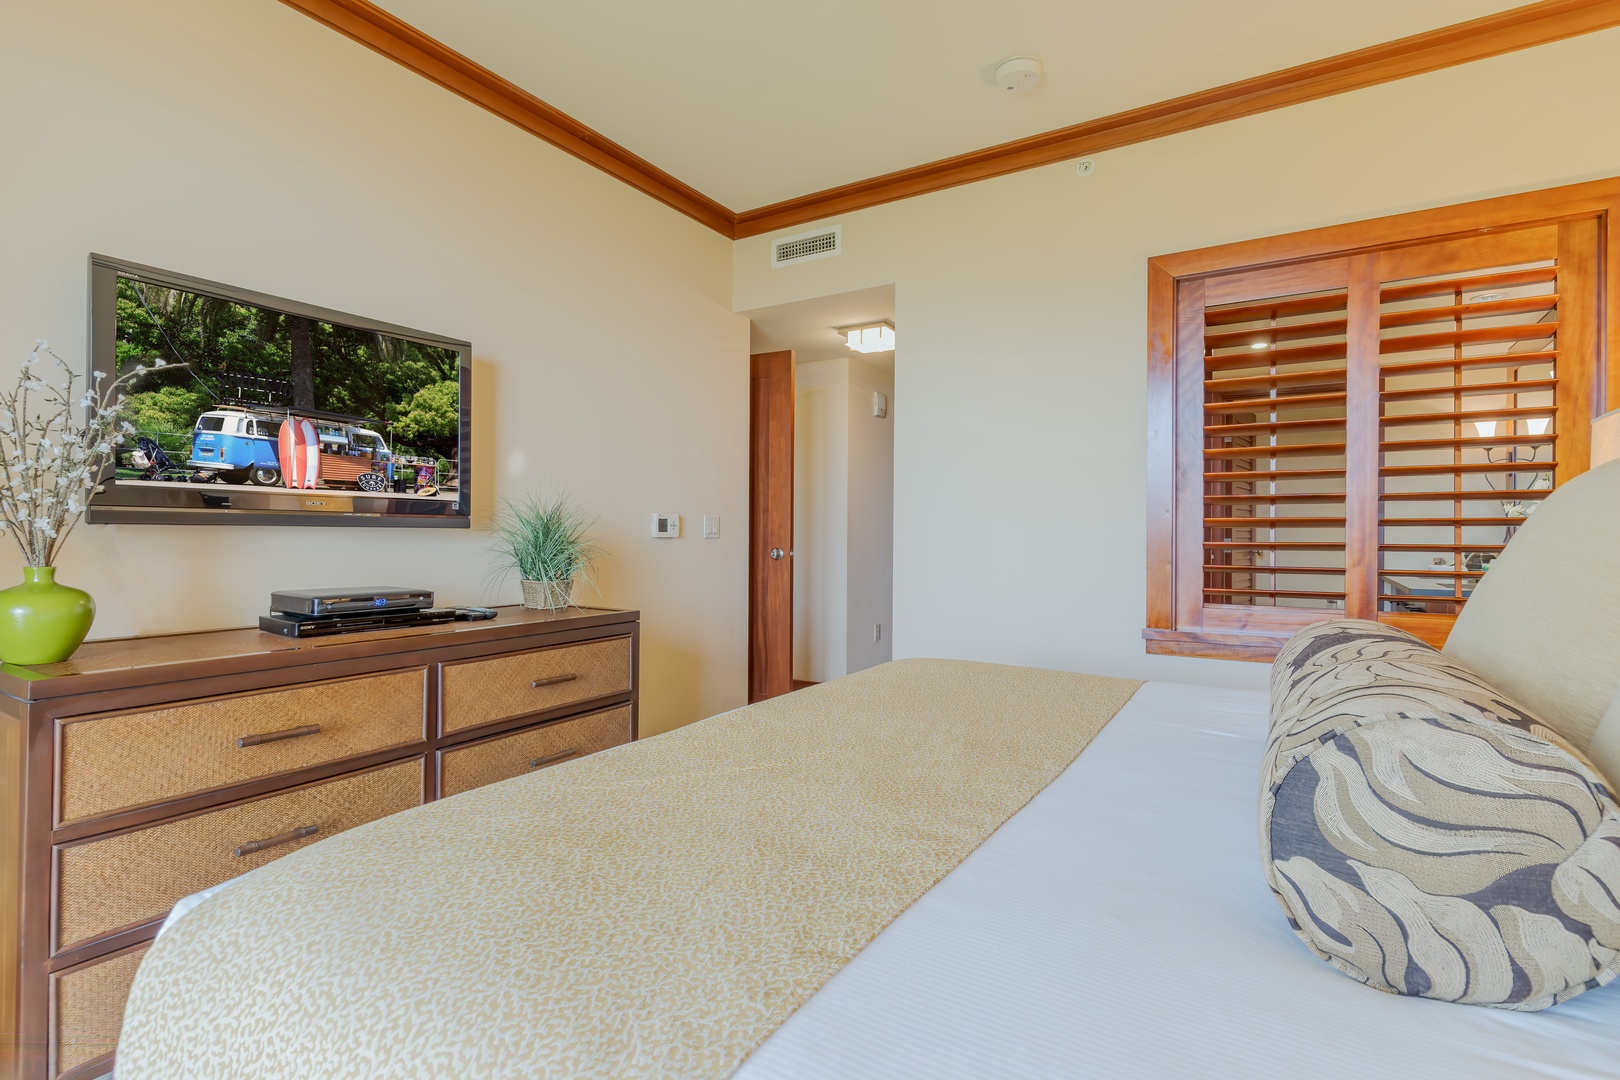 Kapolei Vacation Rentals, Ko Olina Beach Villas B1101 - Welcome to the comfortable and stylish primary guest bedroom.